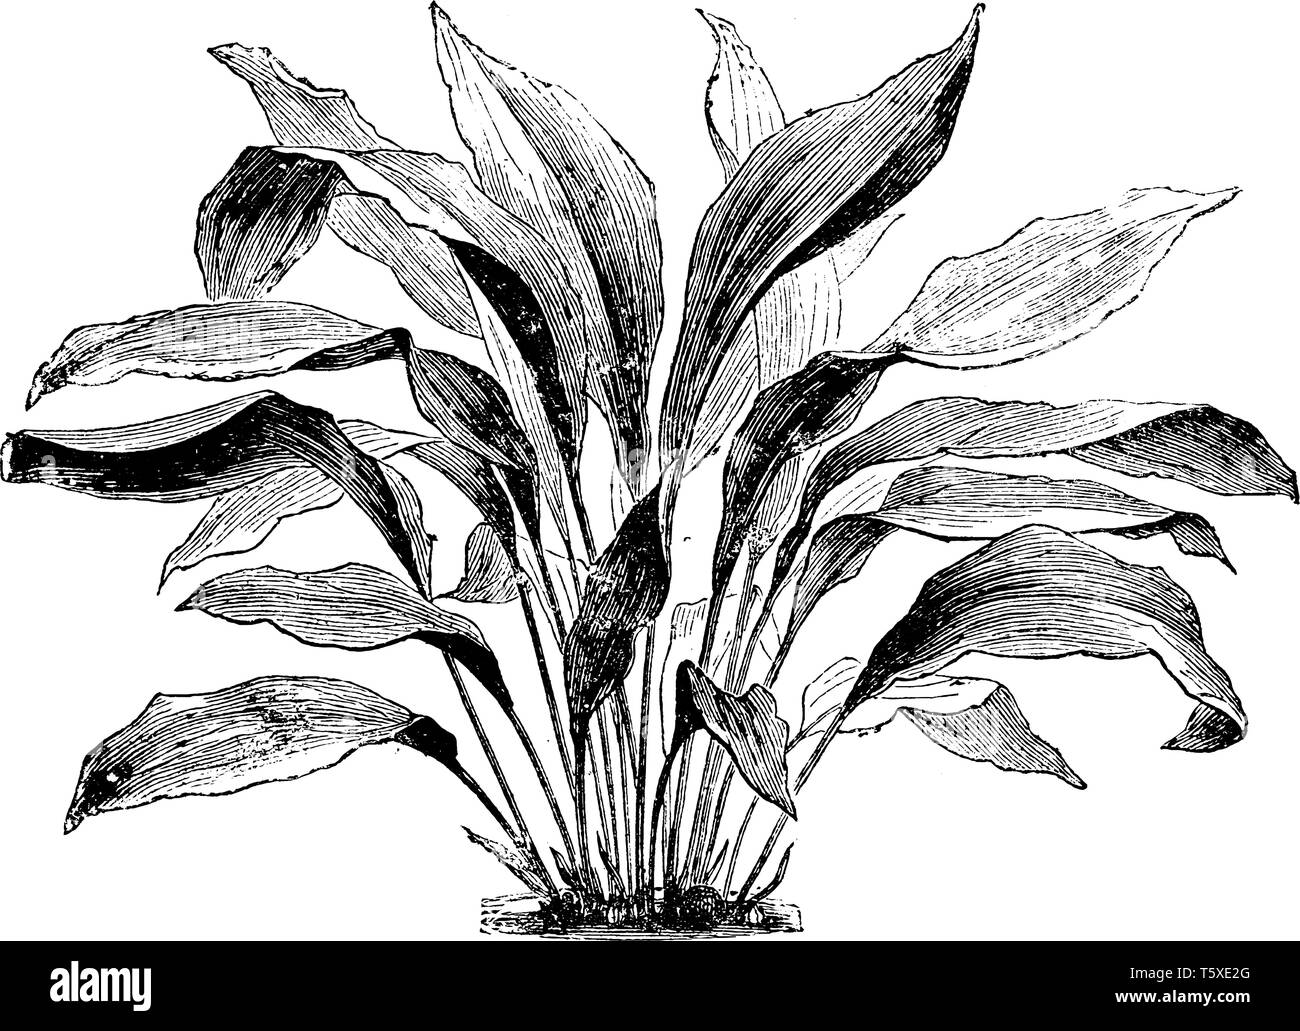 The leaves are growing alone. There are many veins in each leaf. The stem appears beneath the leaves and stalk is very long, vintage line drawing or e Stock Vector